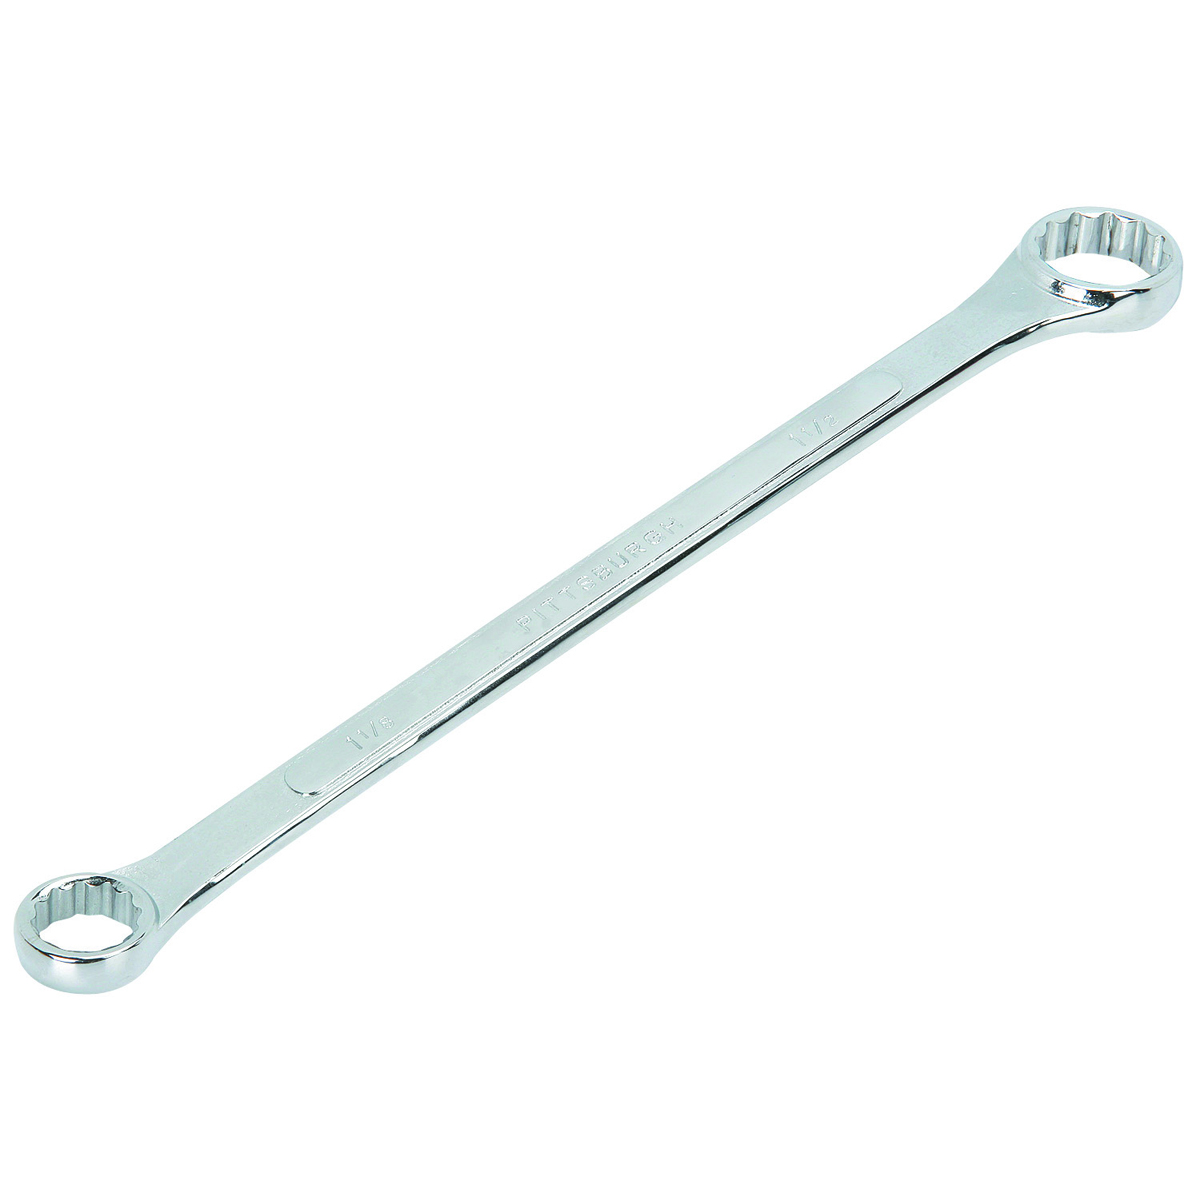 PITTSBURGH Hitch Ball Wrench - Item 95494 / 60707